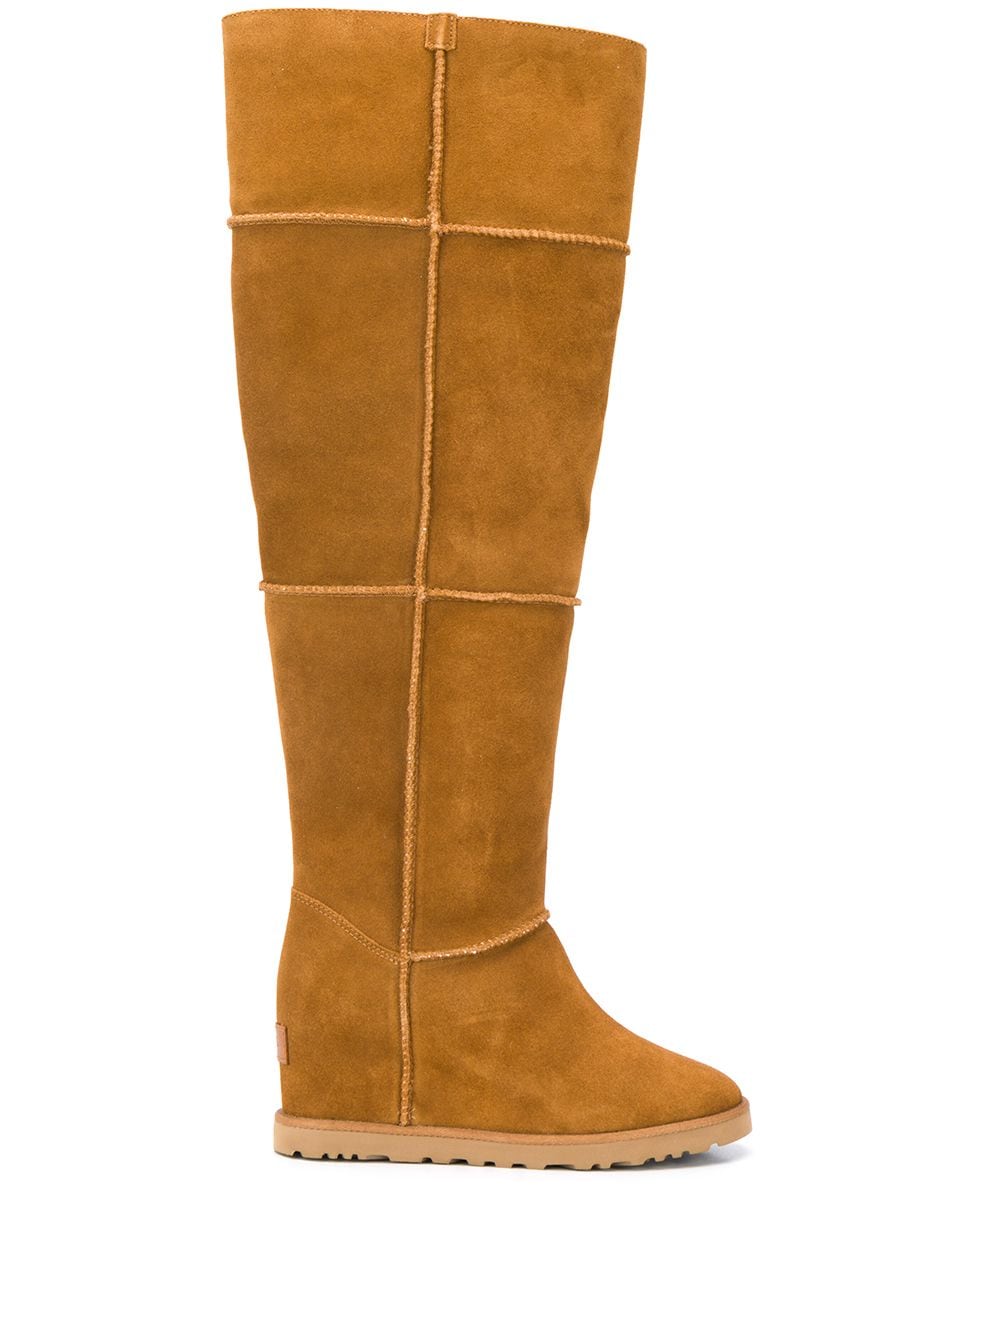 Ugg Panelled Wedge Heel Boots In Brown